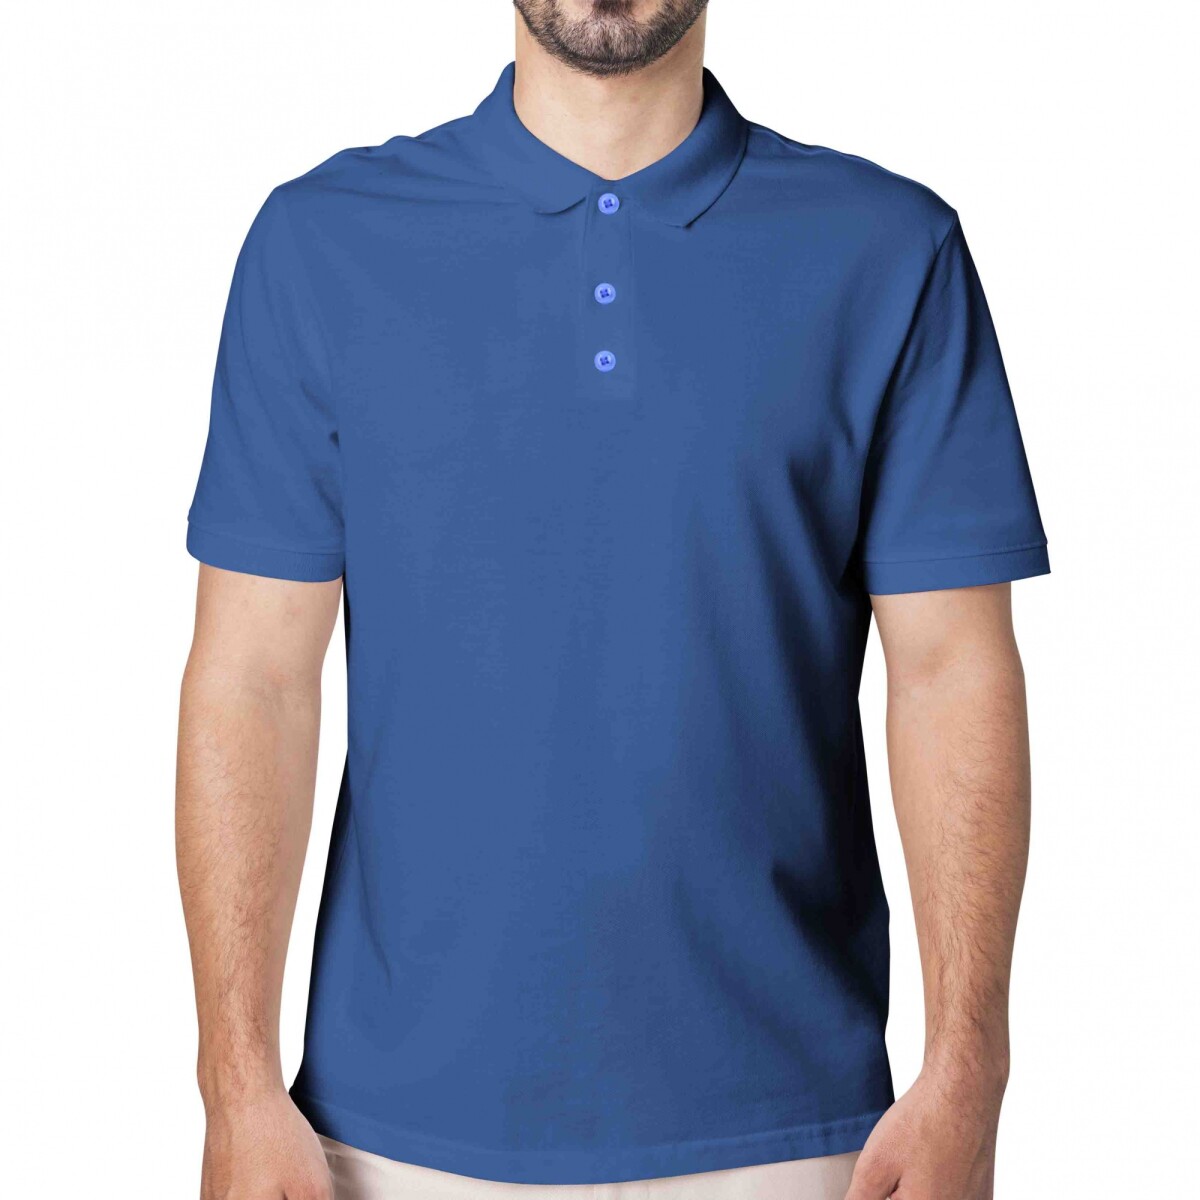 REMERA POLO LISA T S-XL DIF COLORES 